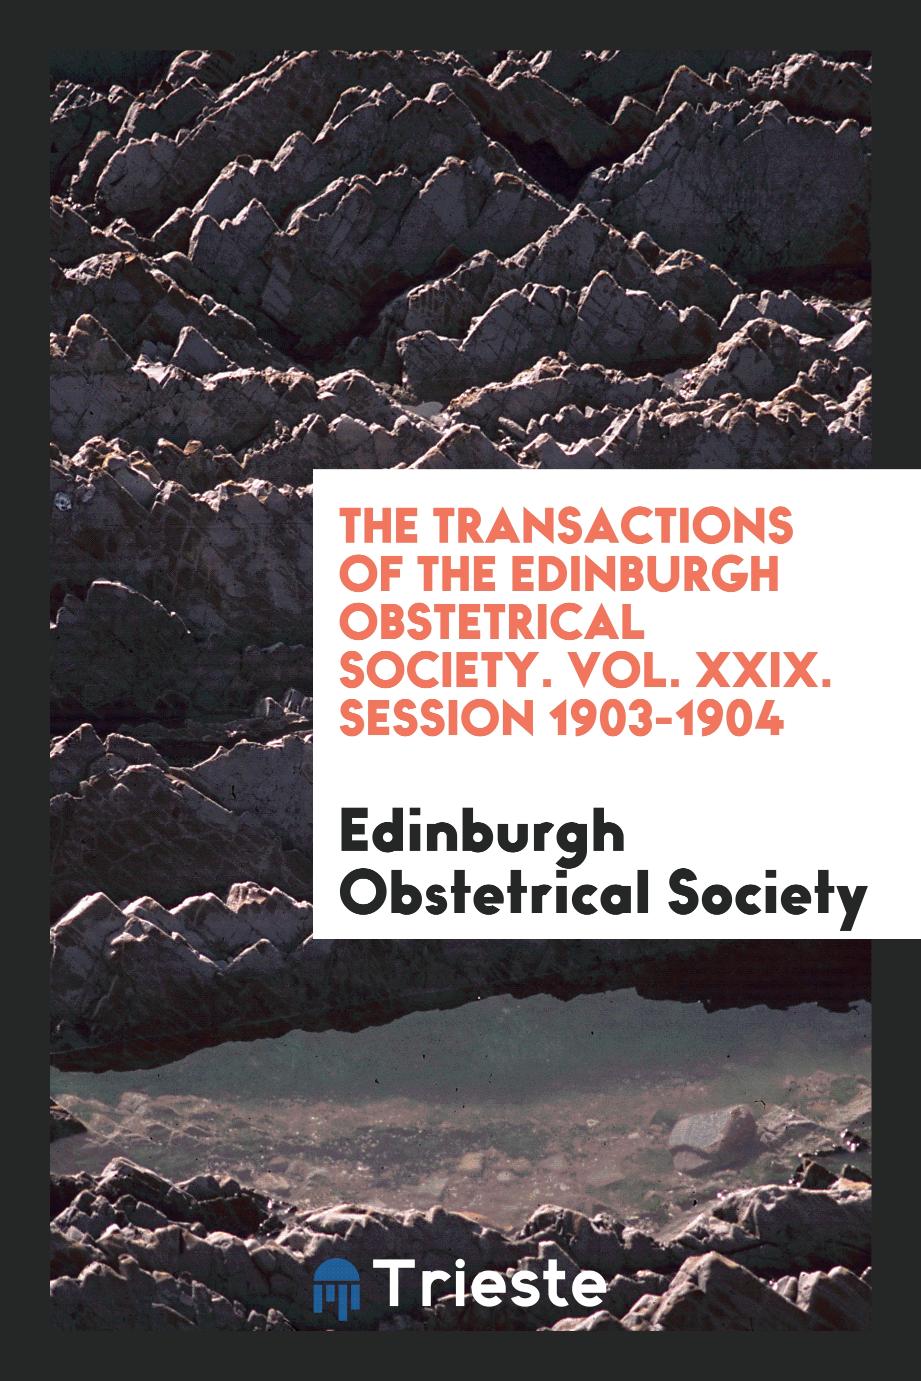 The Transactions of the Edinburgh Obstetrical Society. Vol. XXIX. Session 1903-1904